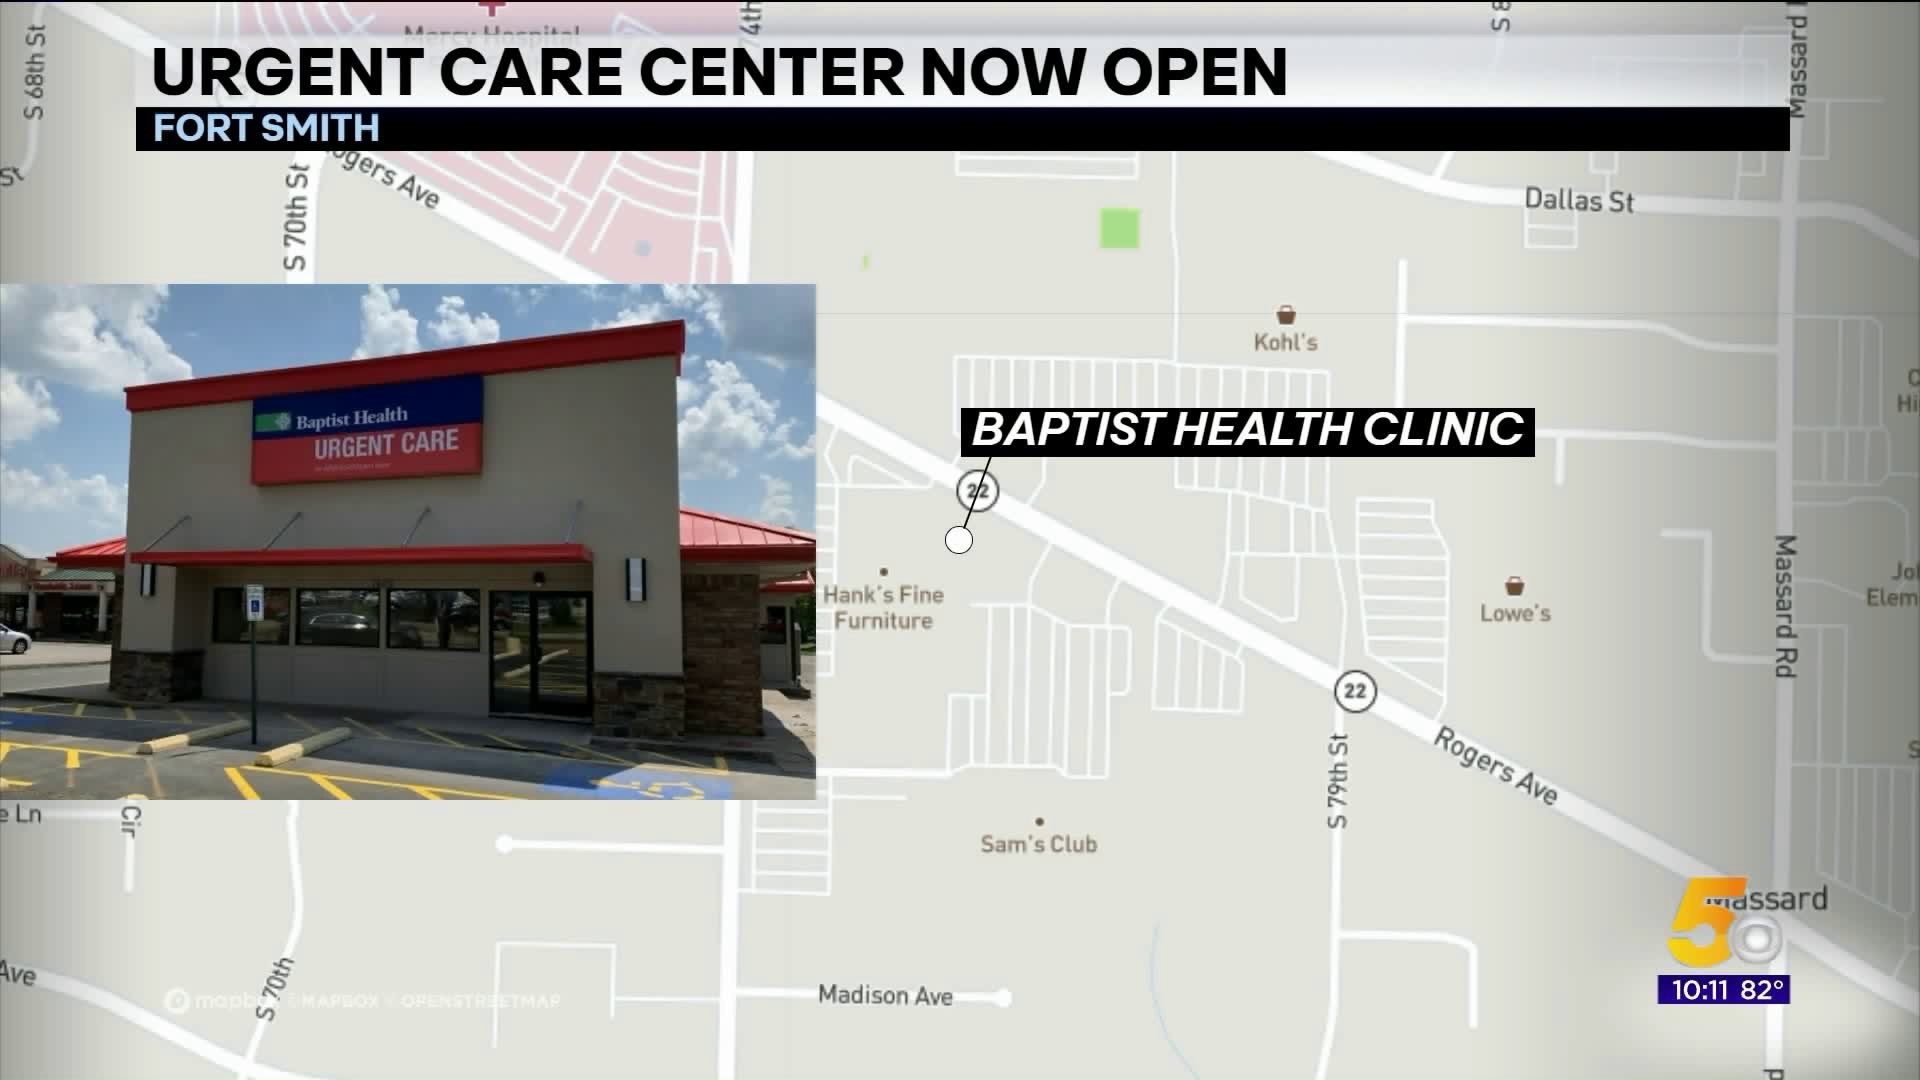 New Urgent Care Center in Fort Smith